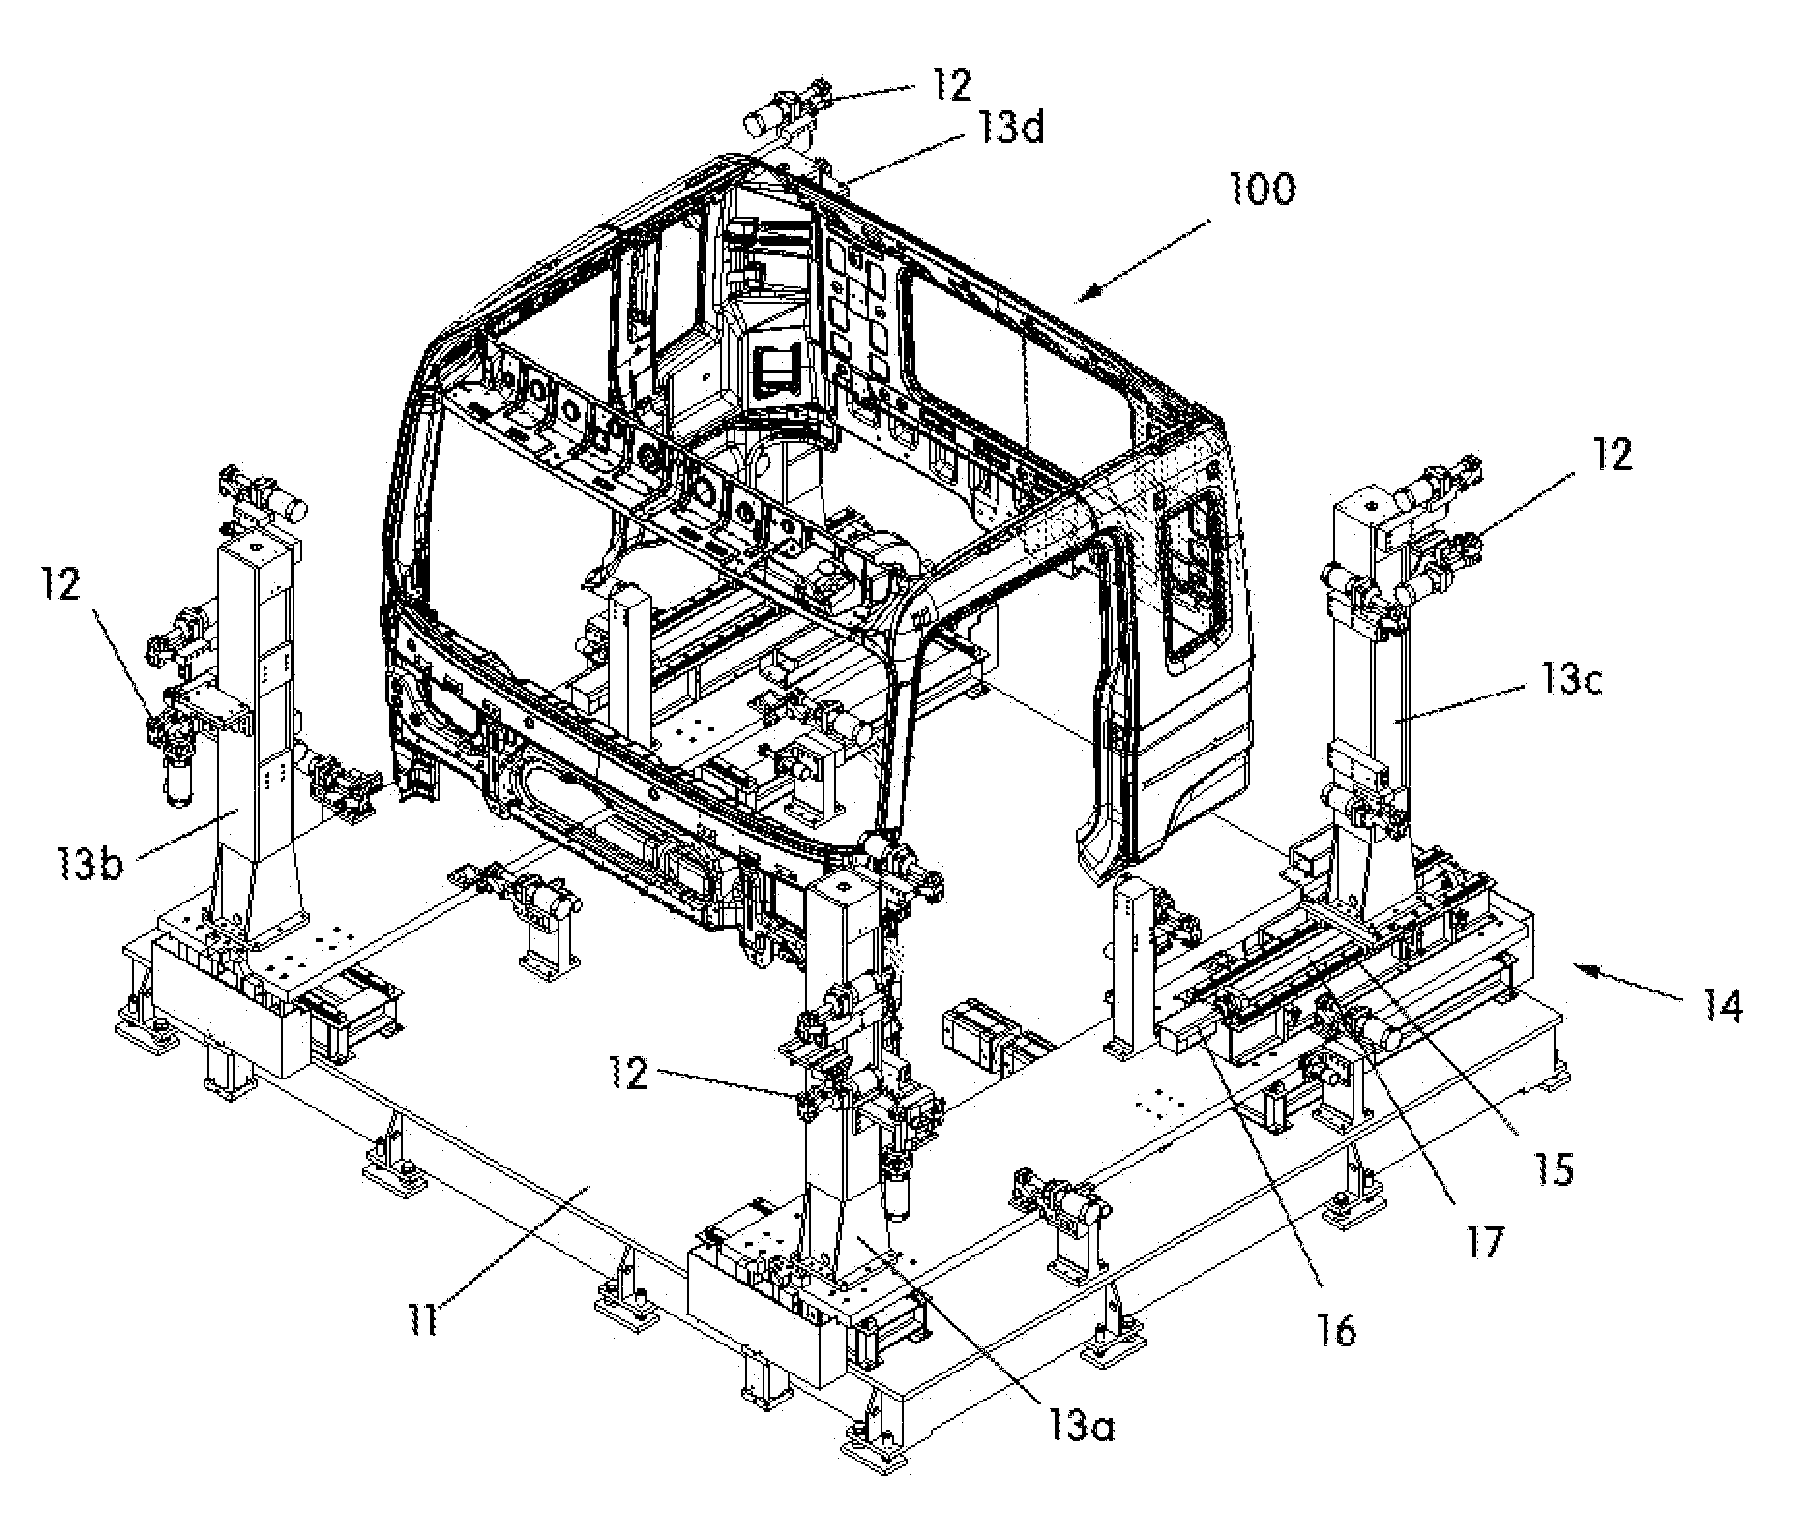 Complete body assembling apparatus for various vehicle models